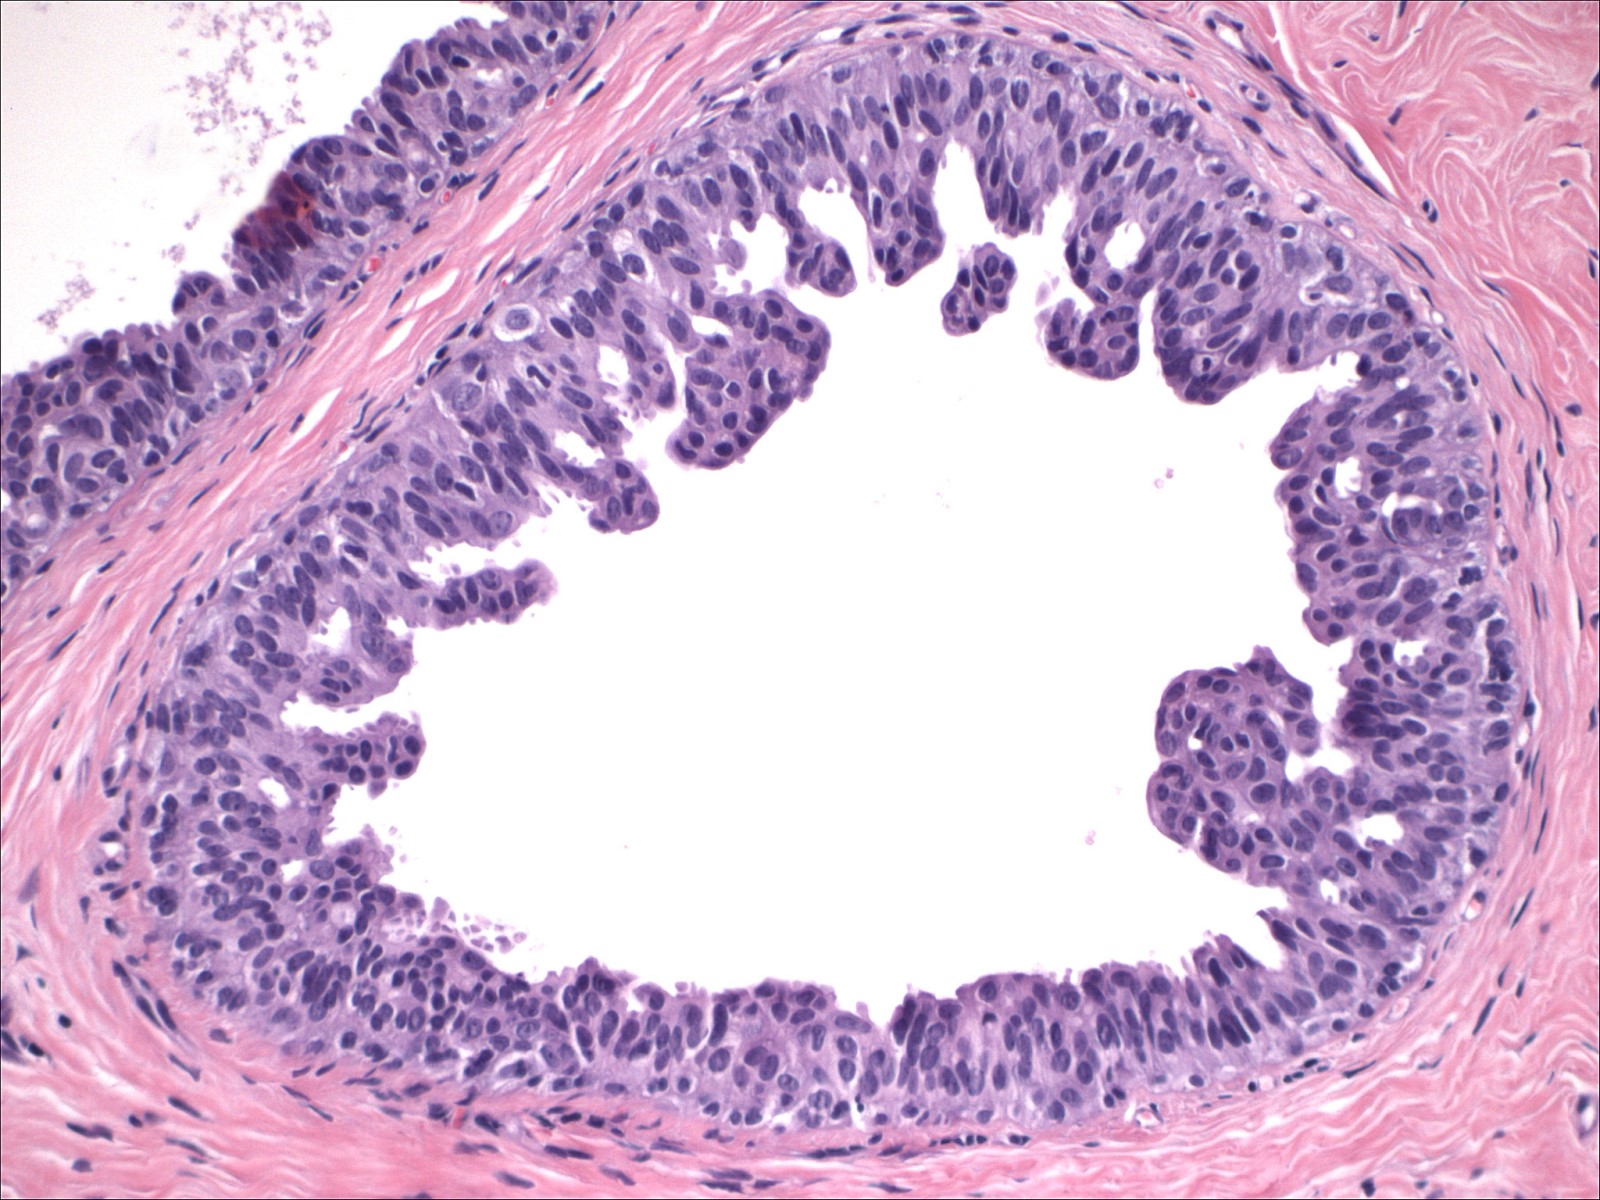 intraductal papilloma with florid hyperplasia